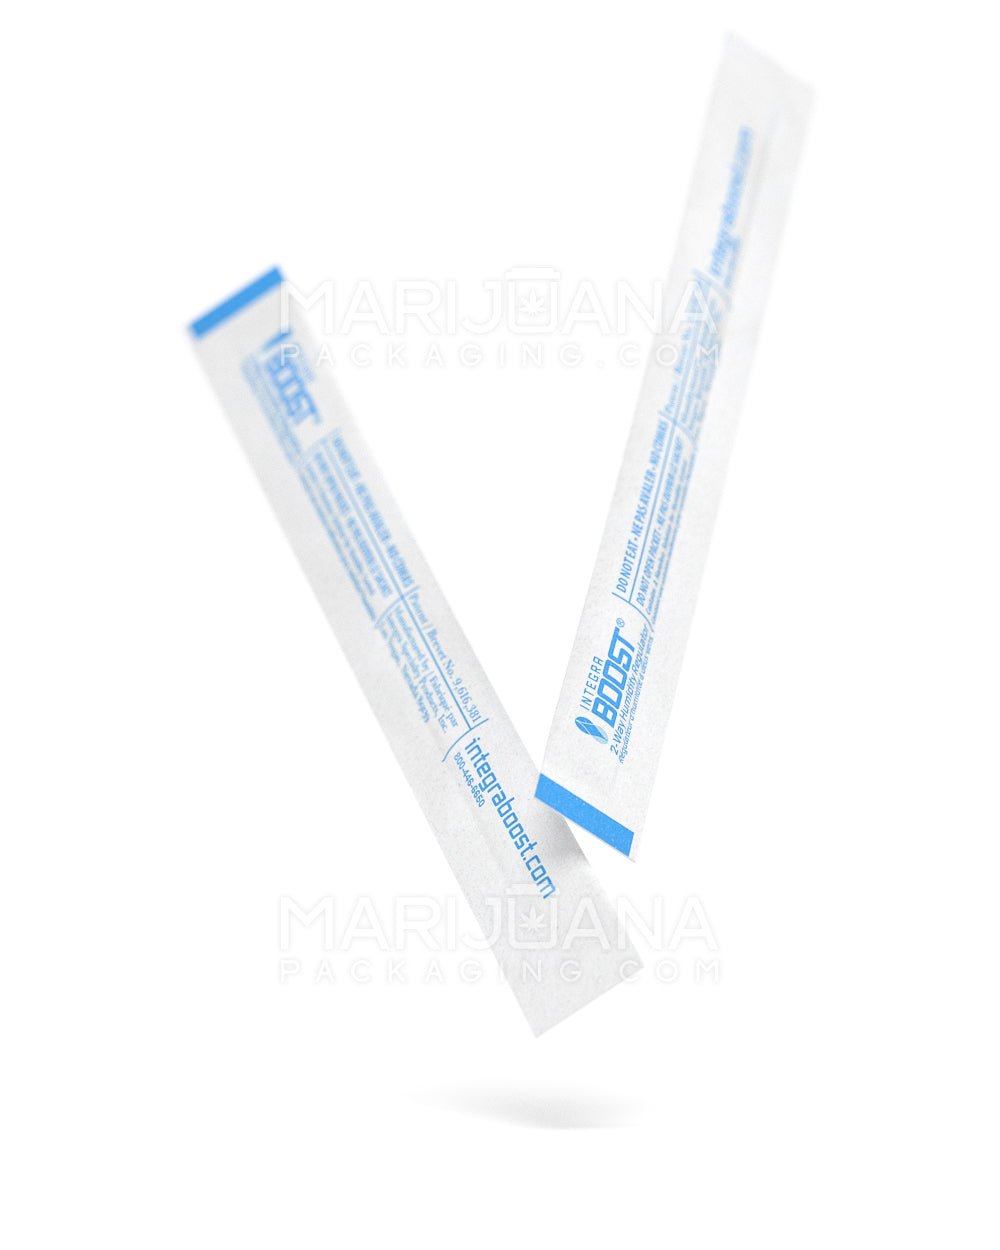 INTEGRA | Boost Pre-Roll Humidity Packs | 110mm - 55% - 100 Count - 4